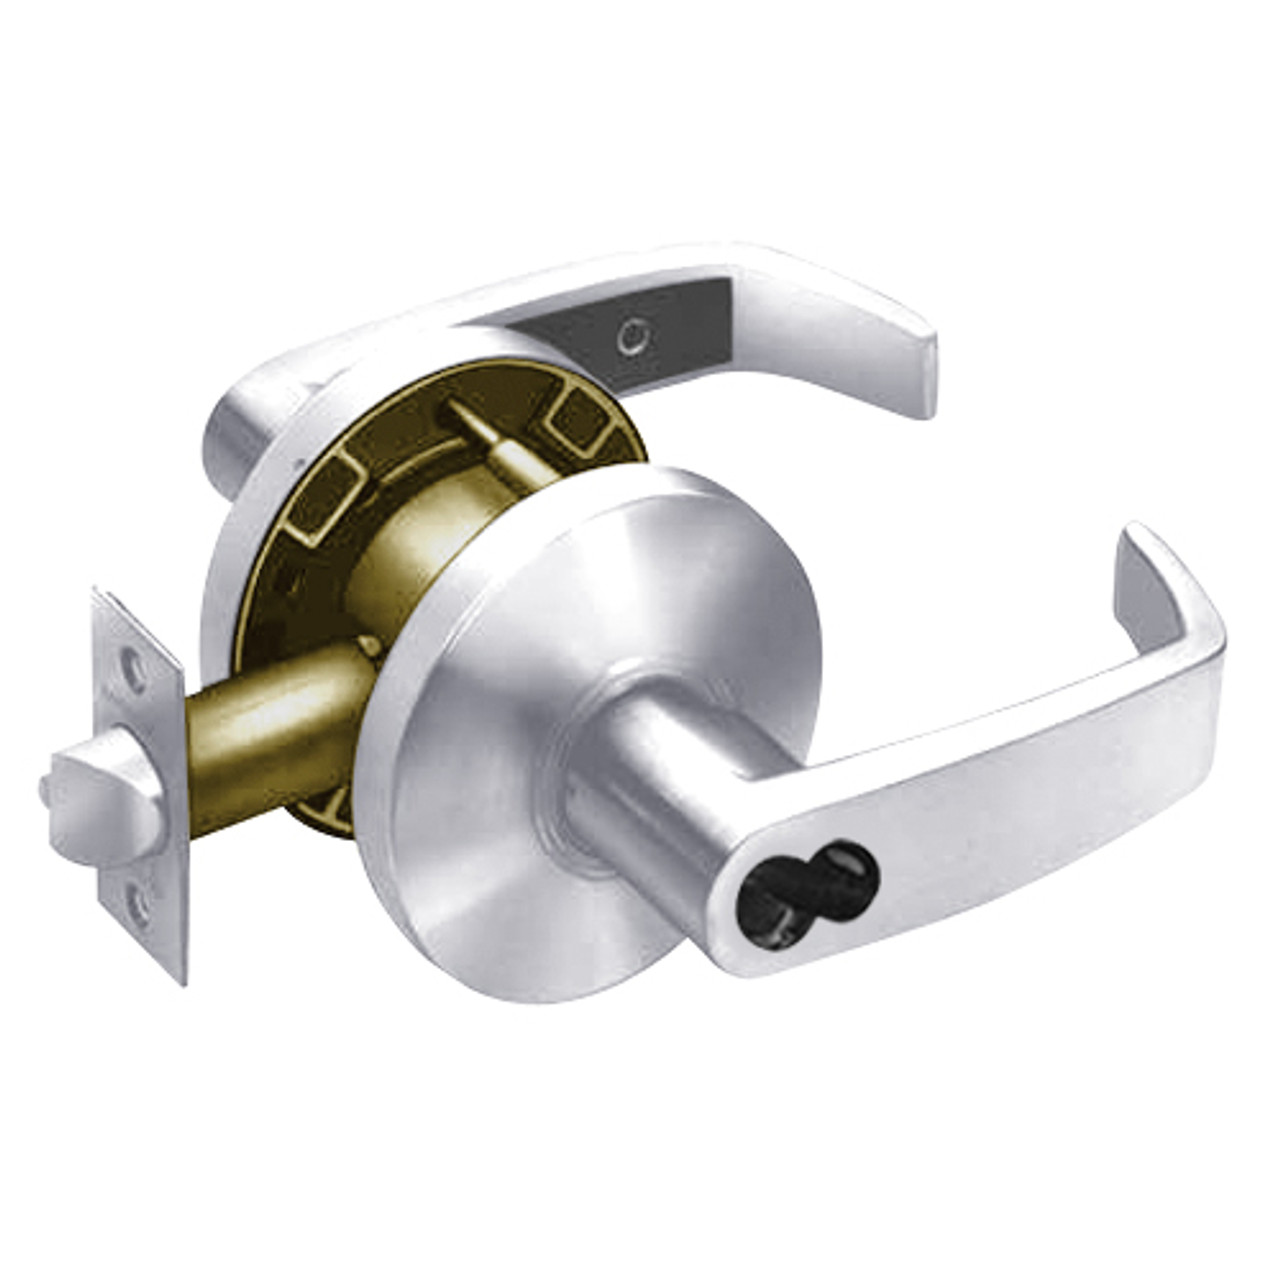 2860-65G05-KL-26 Sargent 6500 Series Cylindrical Entrance/Office Locks with L Lever Design and K Rose Prepped for LFIC in Bright Chrome